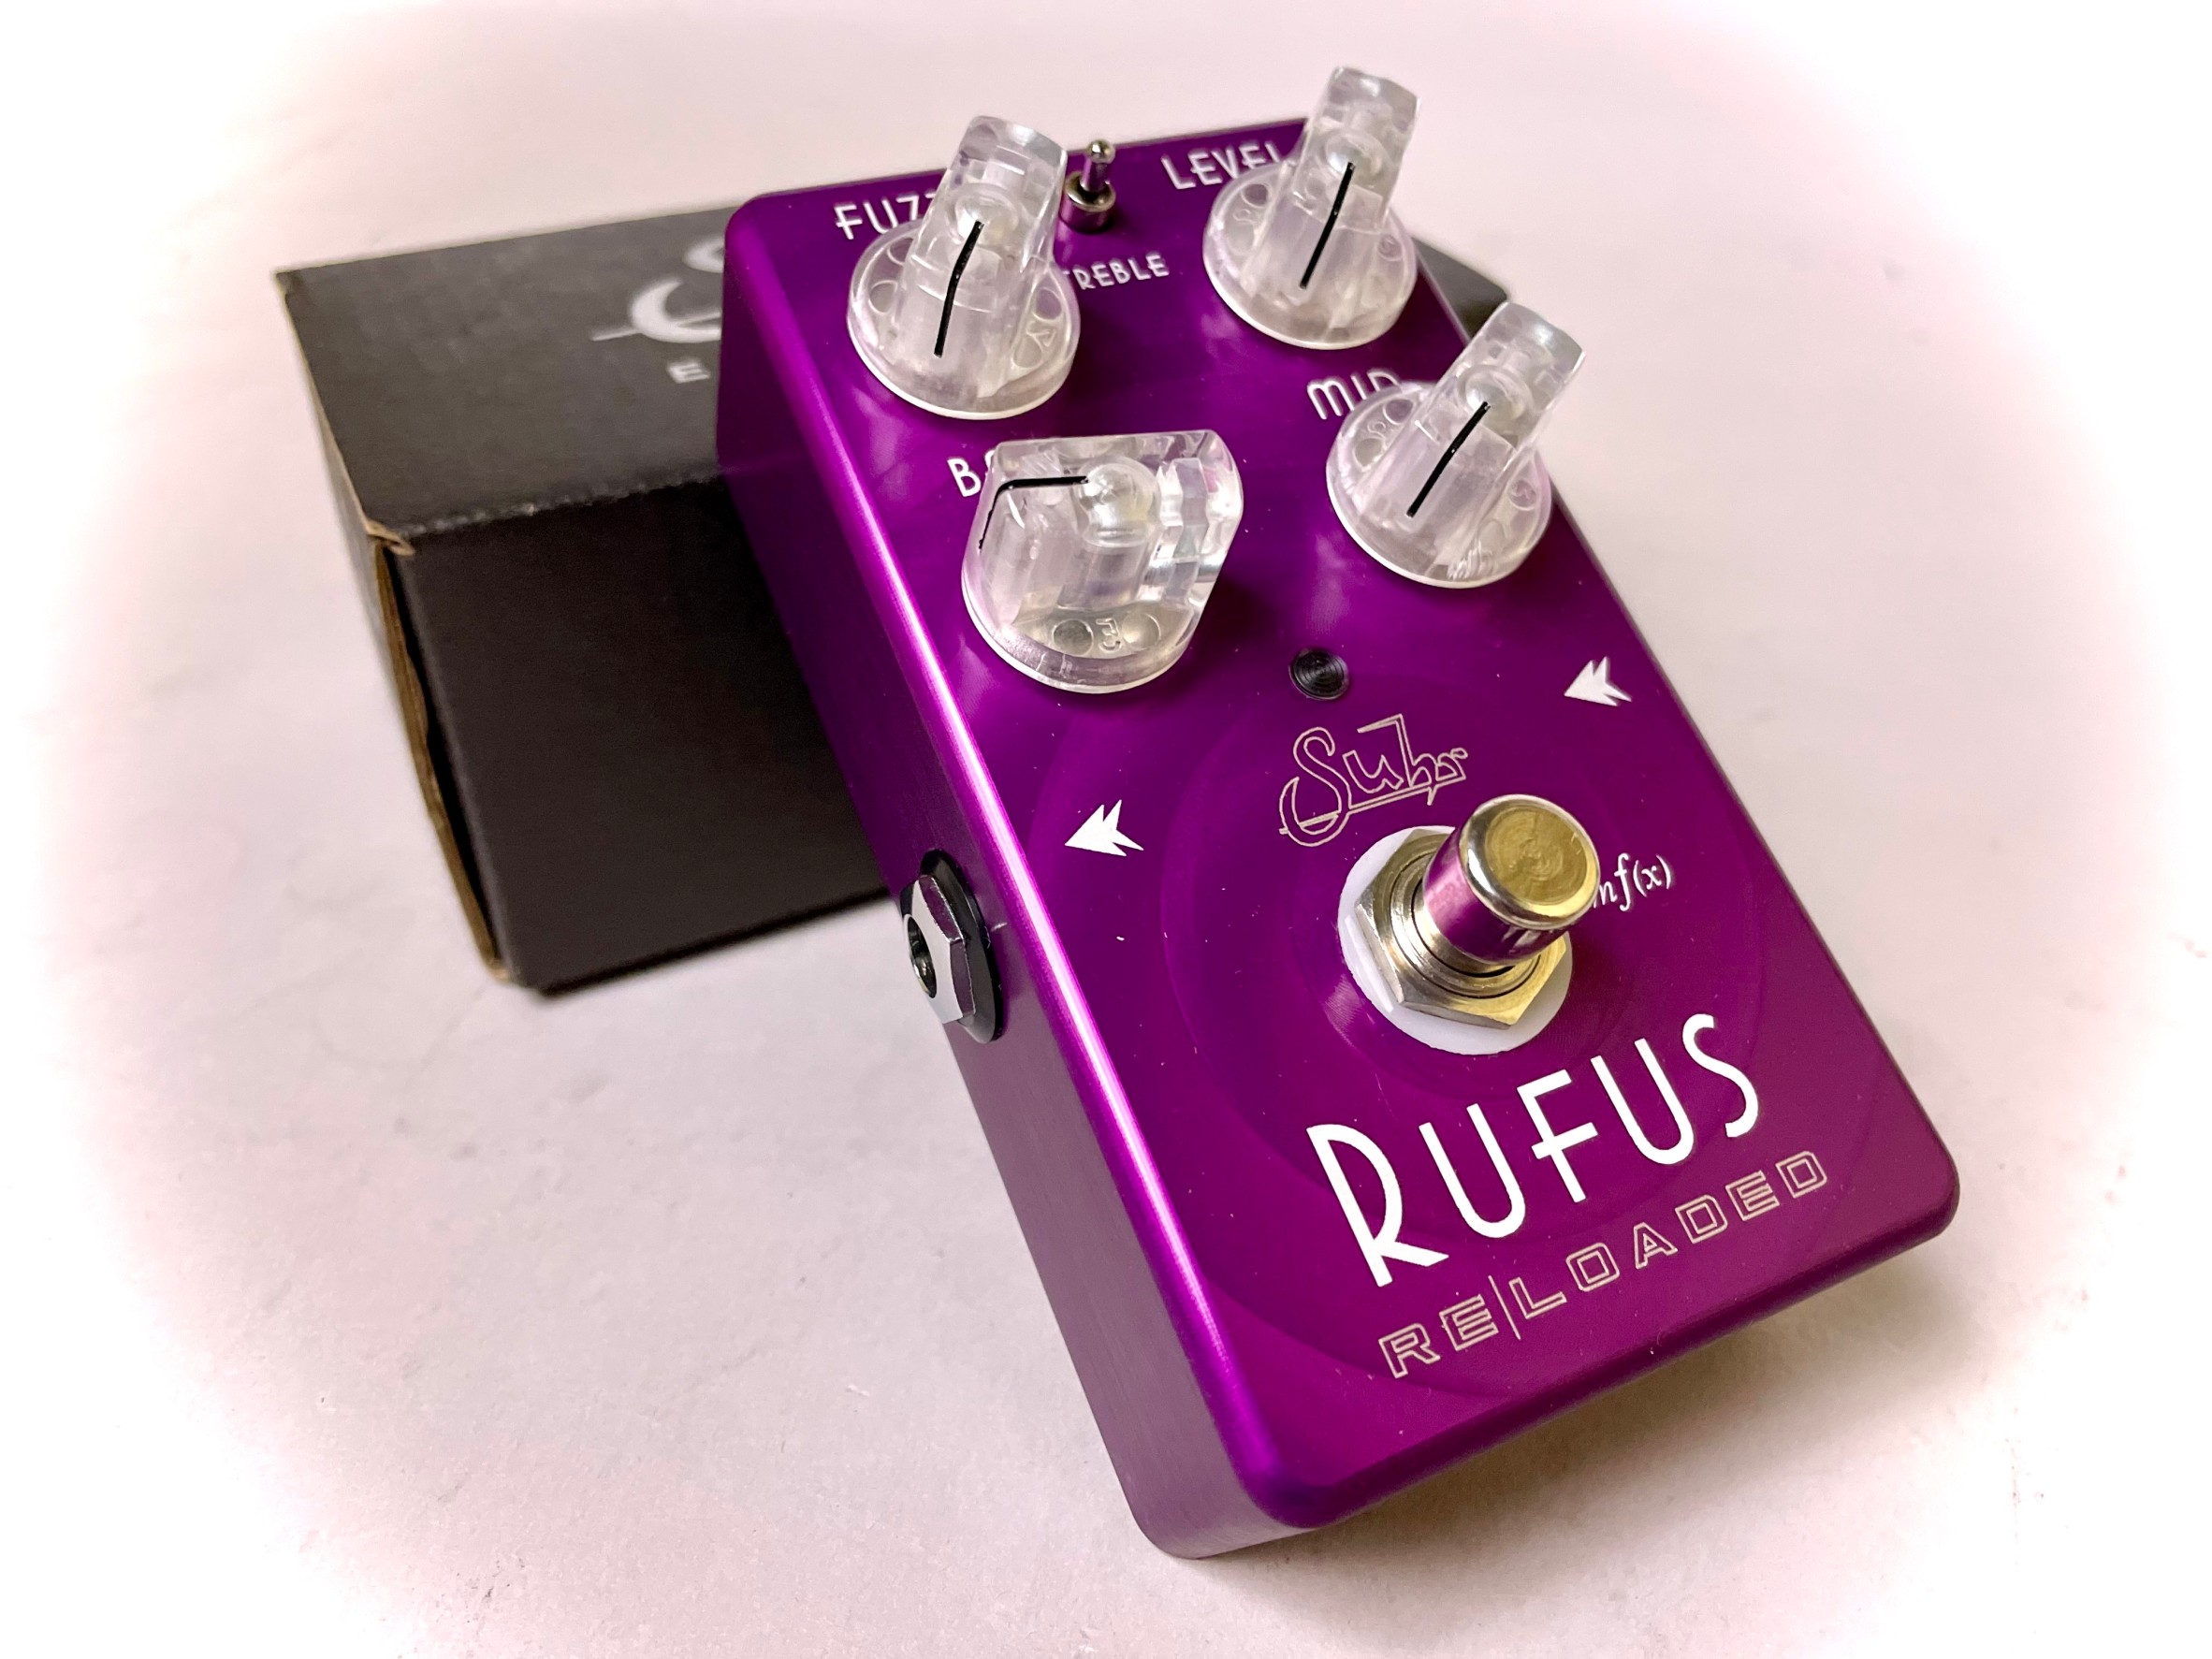 Suhr Guitars Rufus Reloaded Purple Edition 【全世界260台限定ファズ 